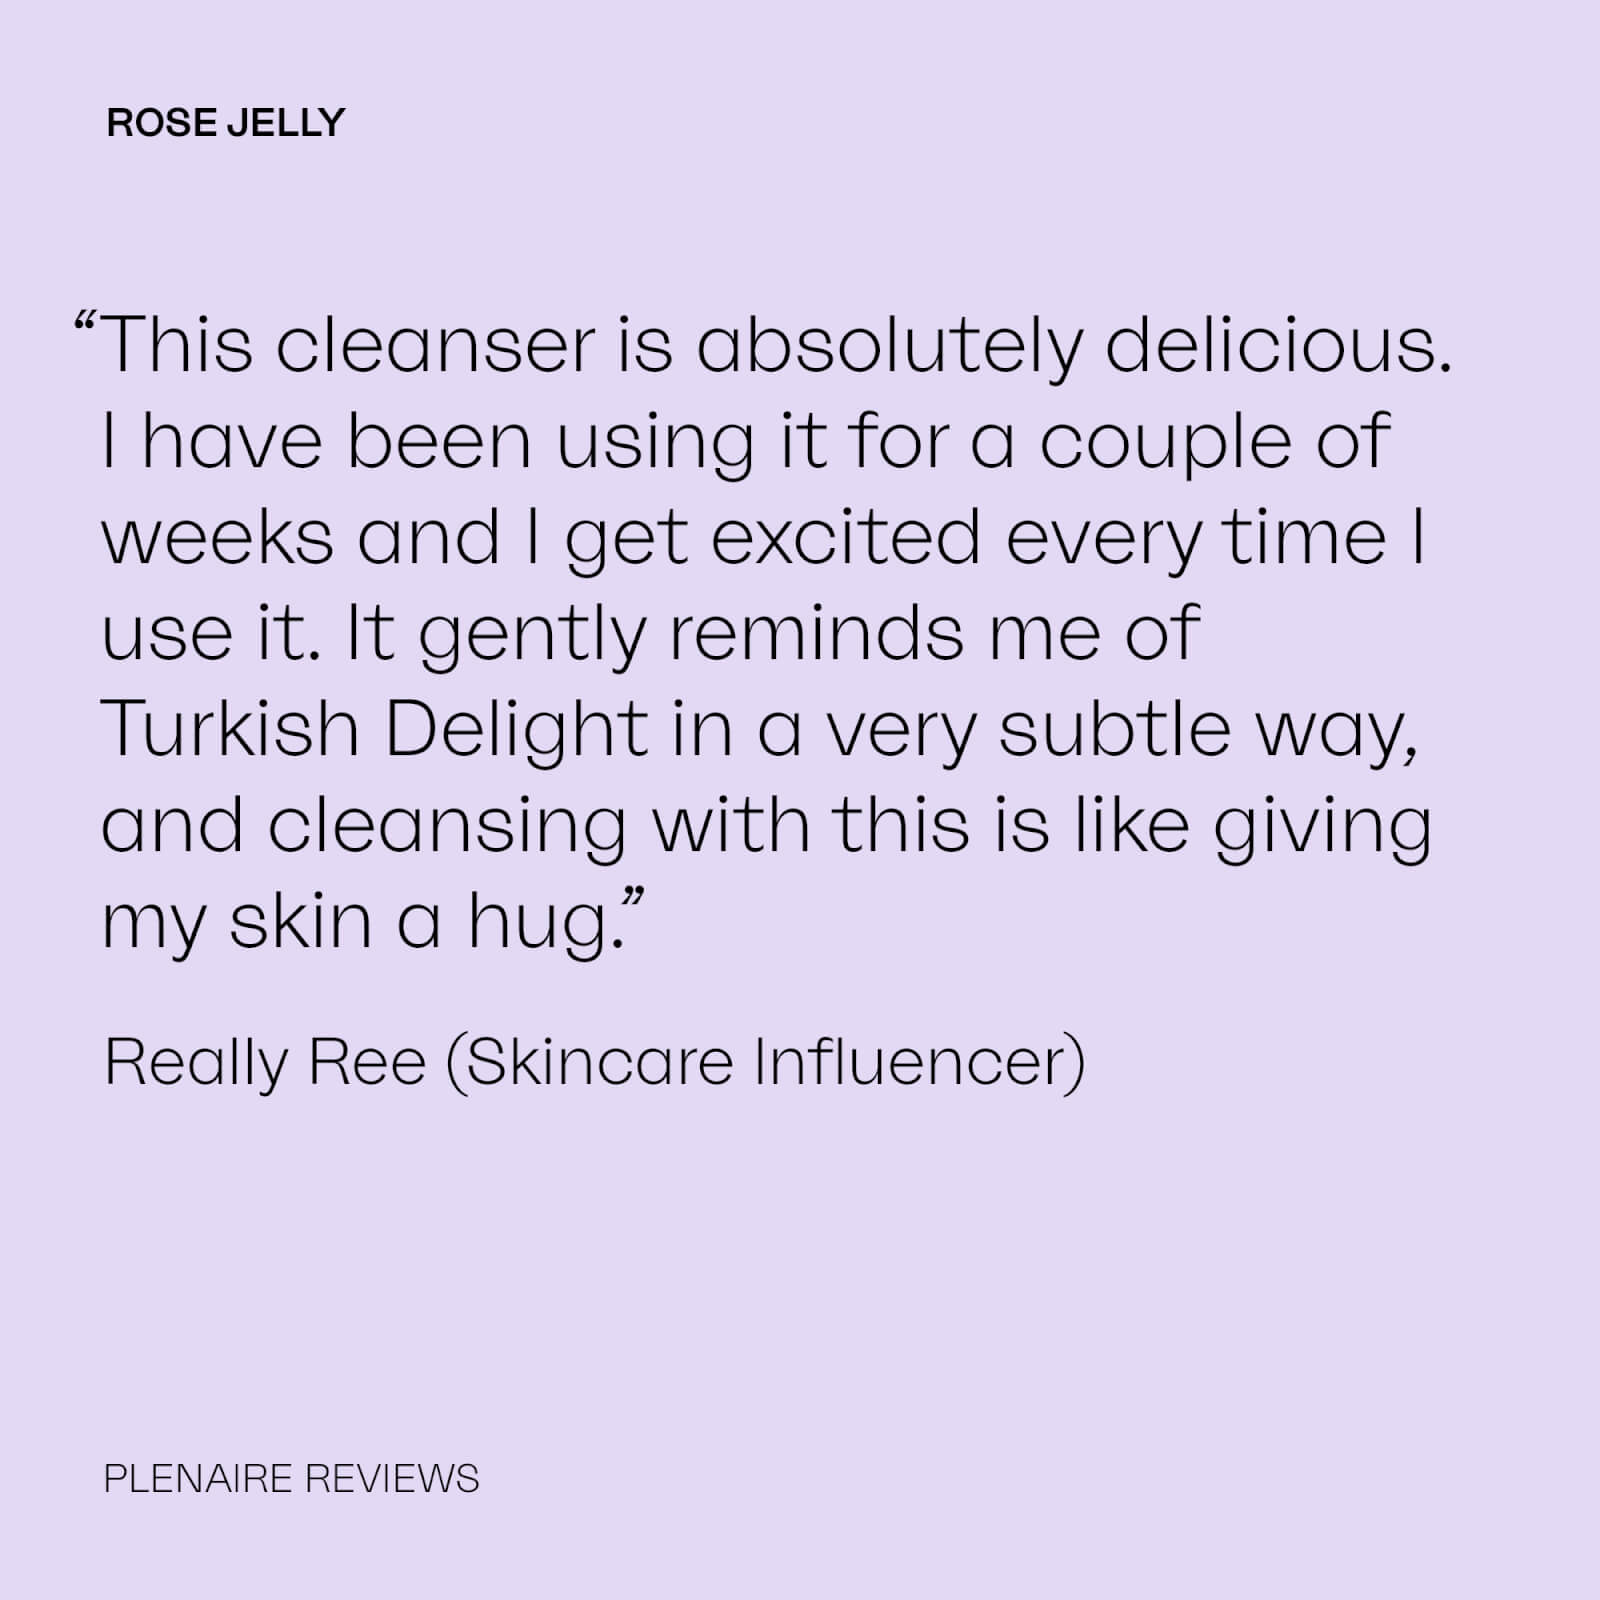 ROSE JELLY
              “This cleanser is absolutely delicious. Thave been using it for a couple of weeks and I get excited every time || use it. It gently reminds me of Turkish Delight in a very subtle way, and cleansing with this is like giving my skin a hug.” Really Ree (Skincare Influencer)
              PLENAIRE REVIEWS